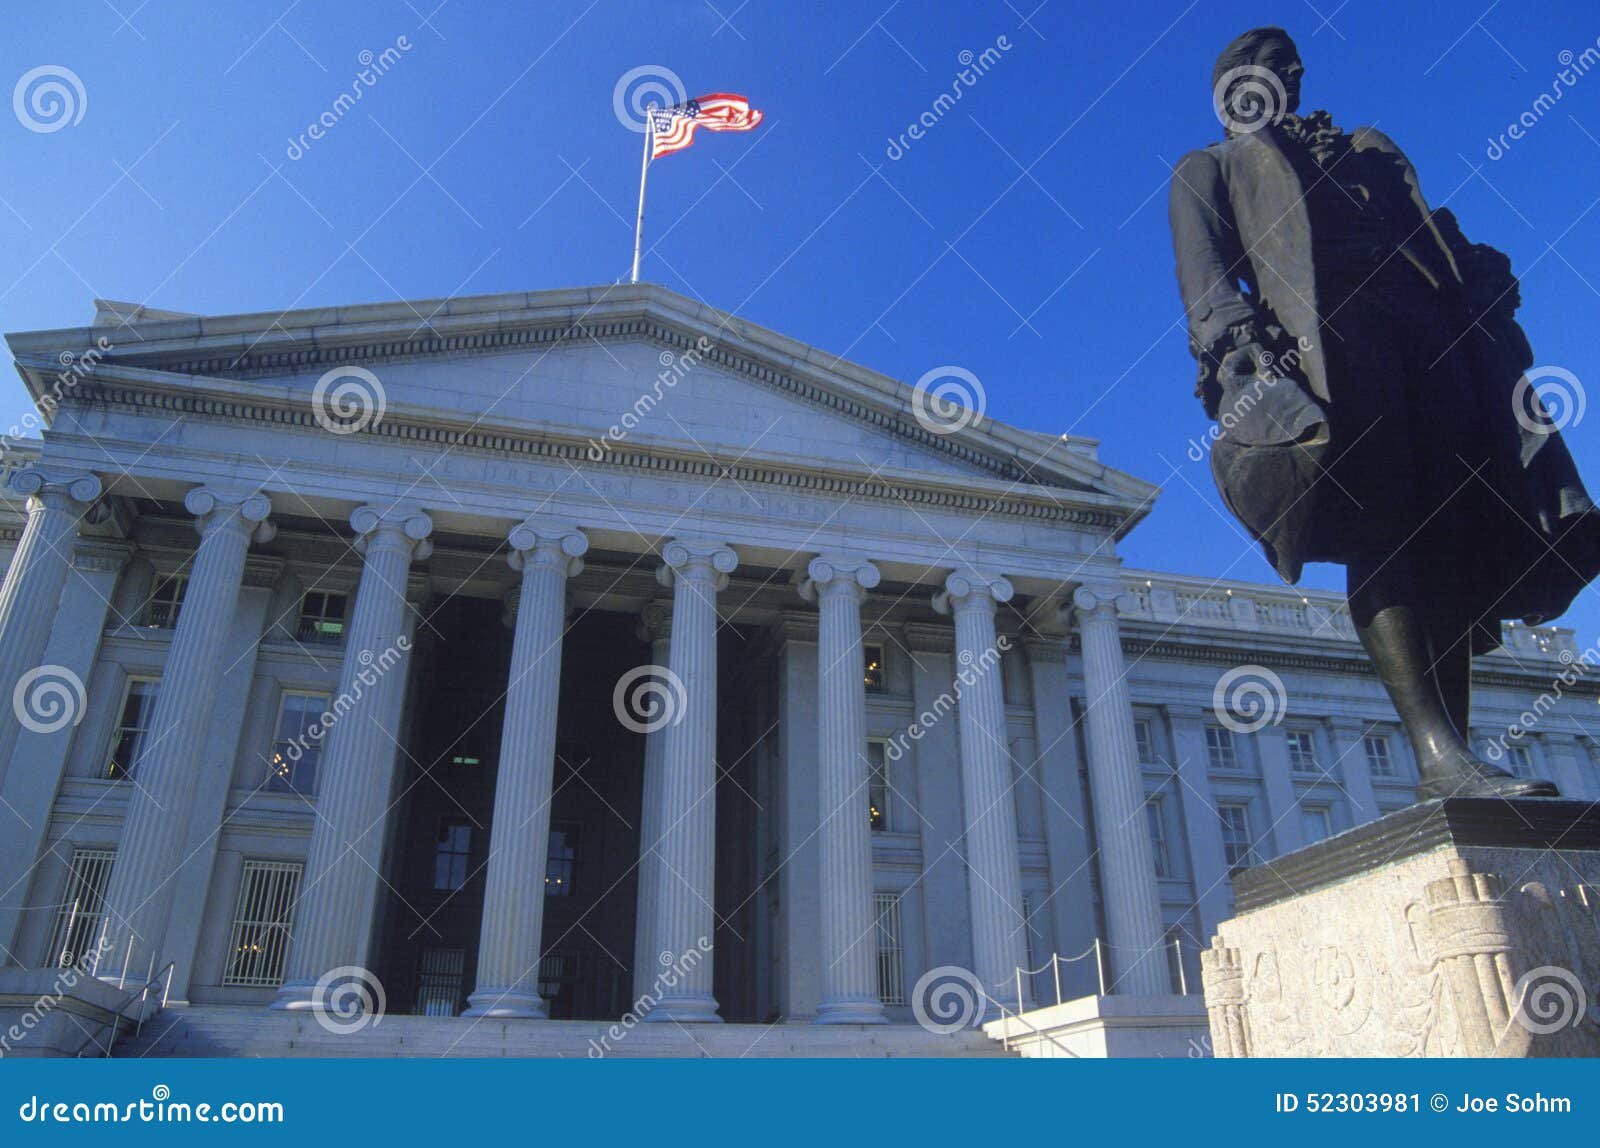 statue of alexander hamilton in front of the united states department of treasury, washington, d.c.